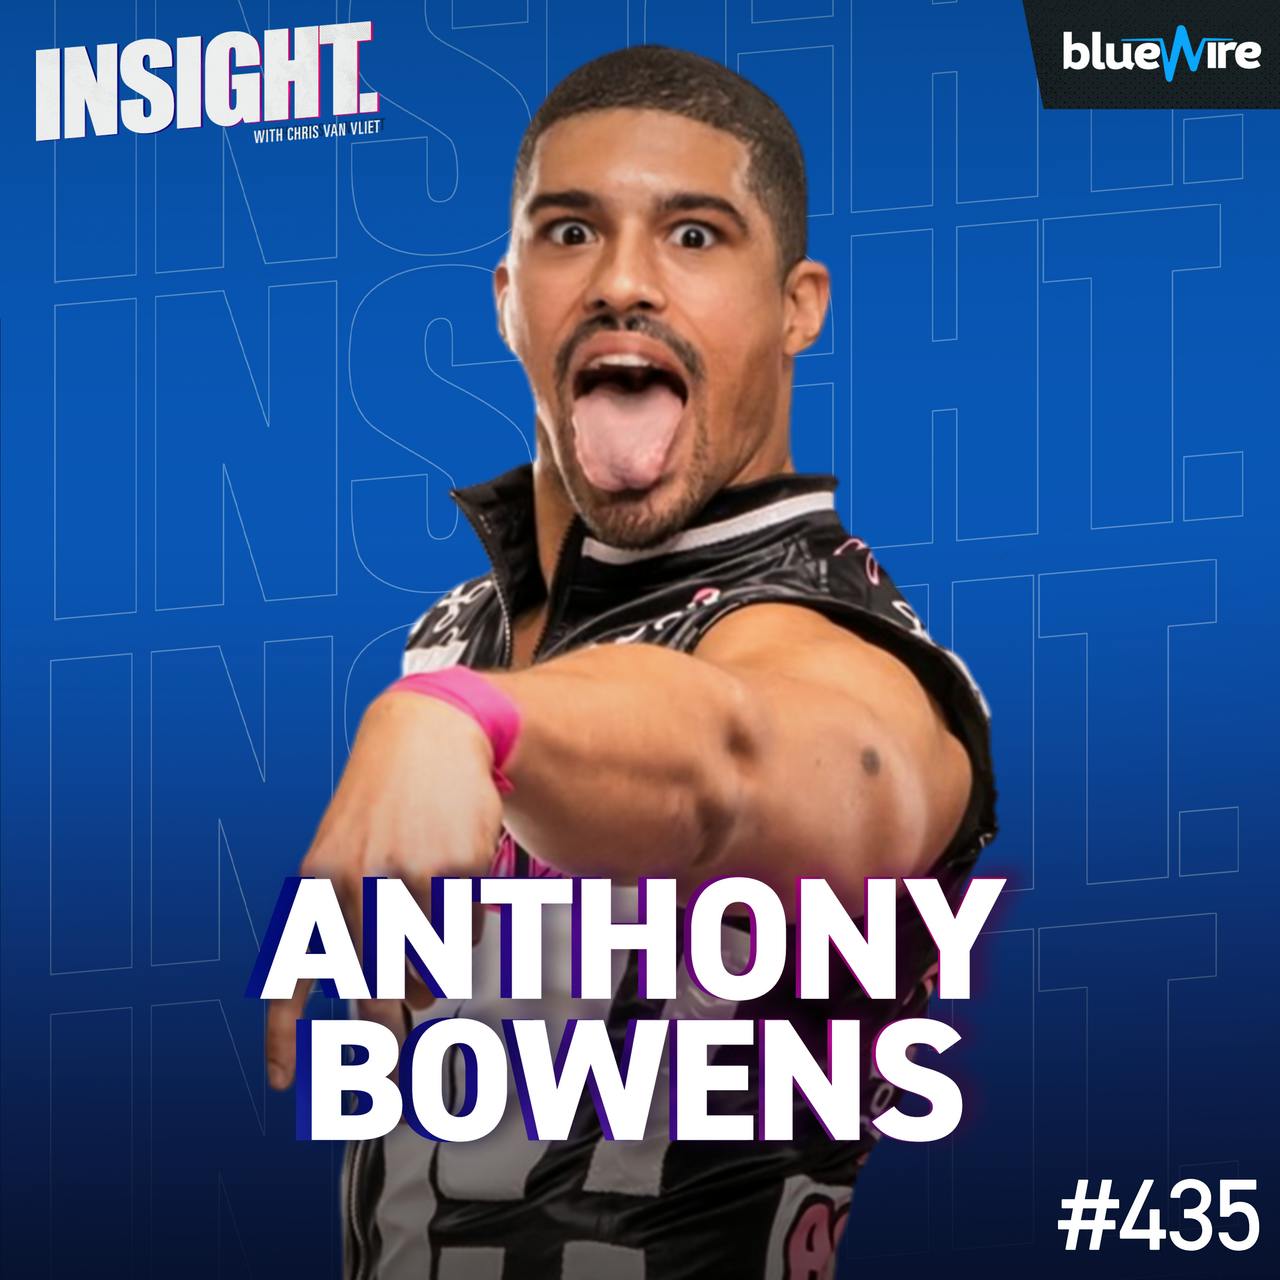 Anthony Bowens On The Acclaimed, Billy Gunn, "Scissor Me" Catchphrase, Max Caster's Rapping Image